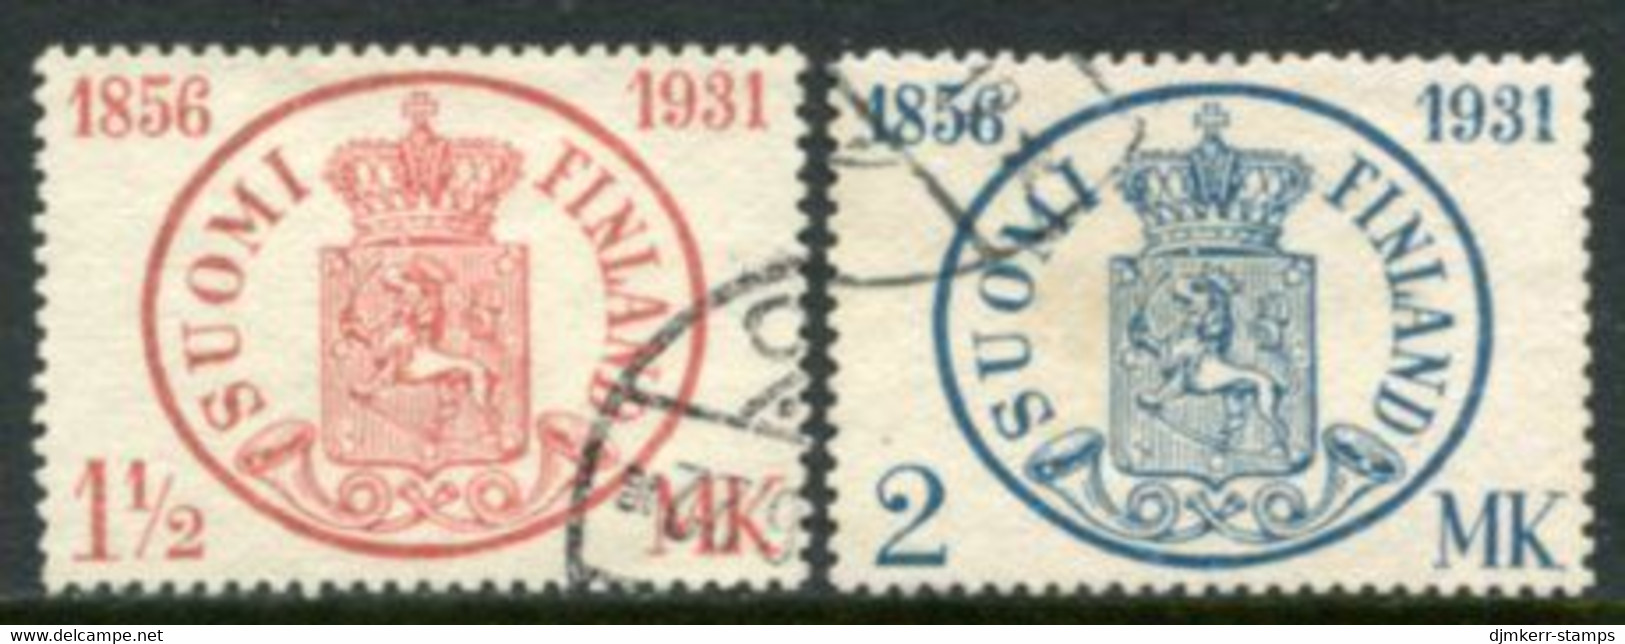 FINLAND 1931 Stamp Anniversary Used.  Michel 167-68 - Used Stamps